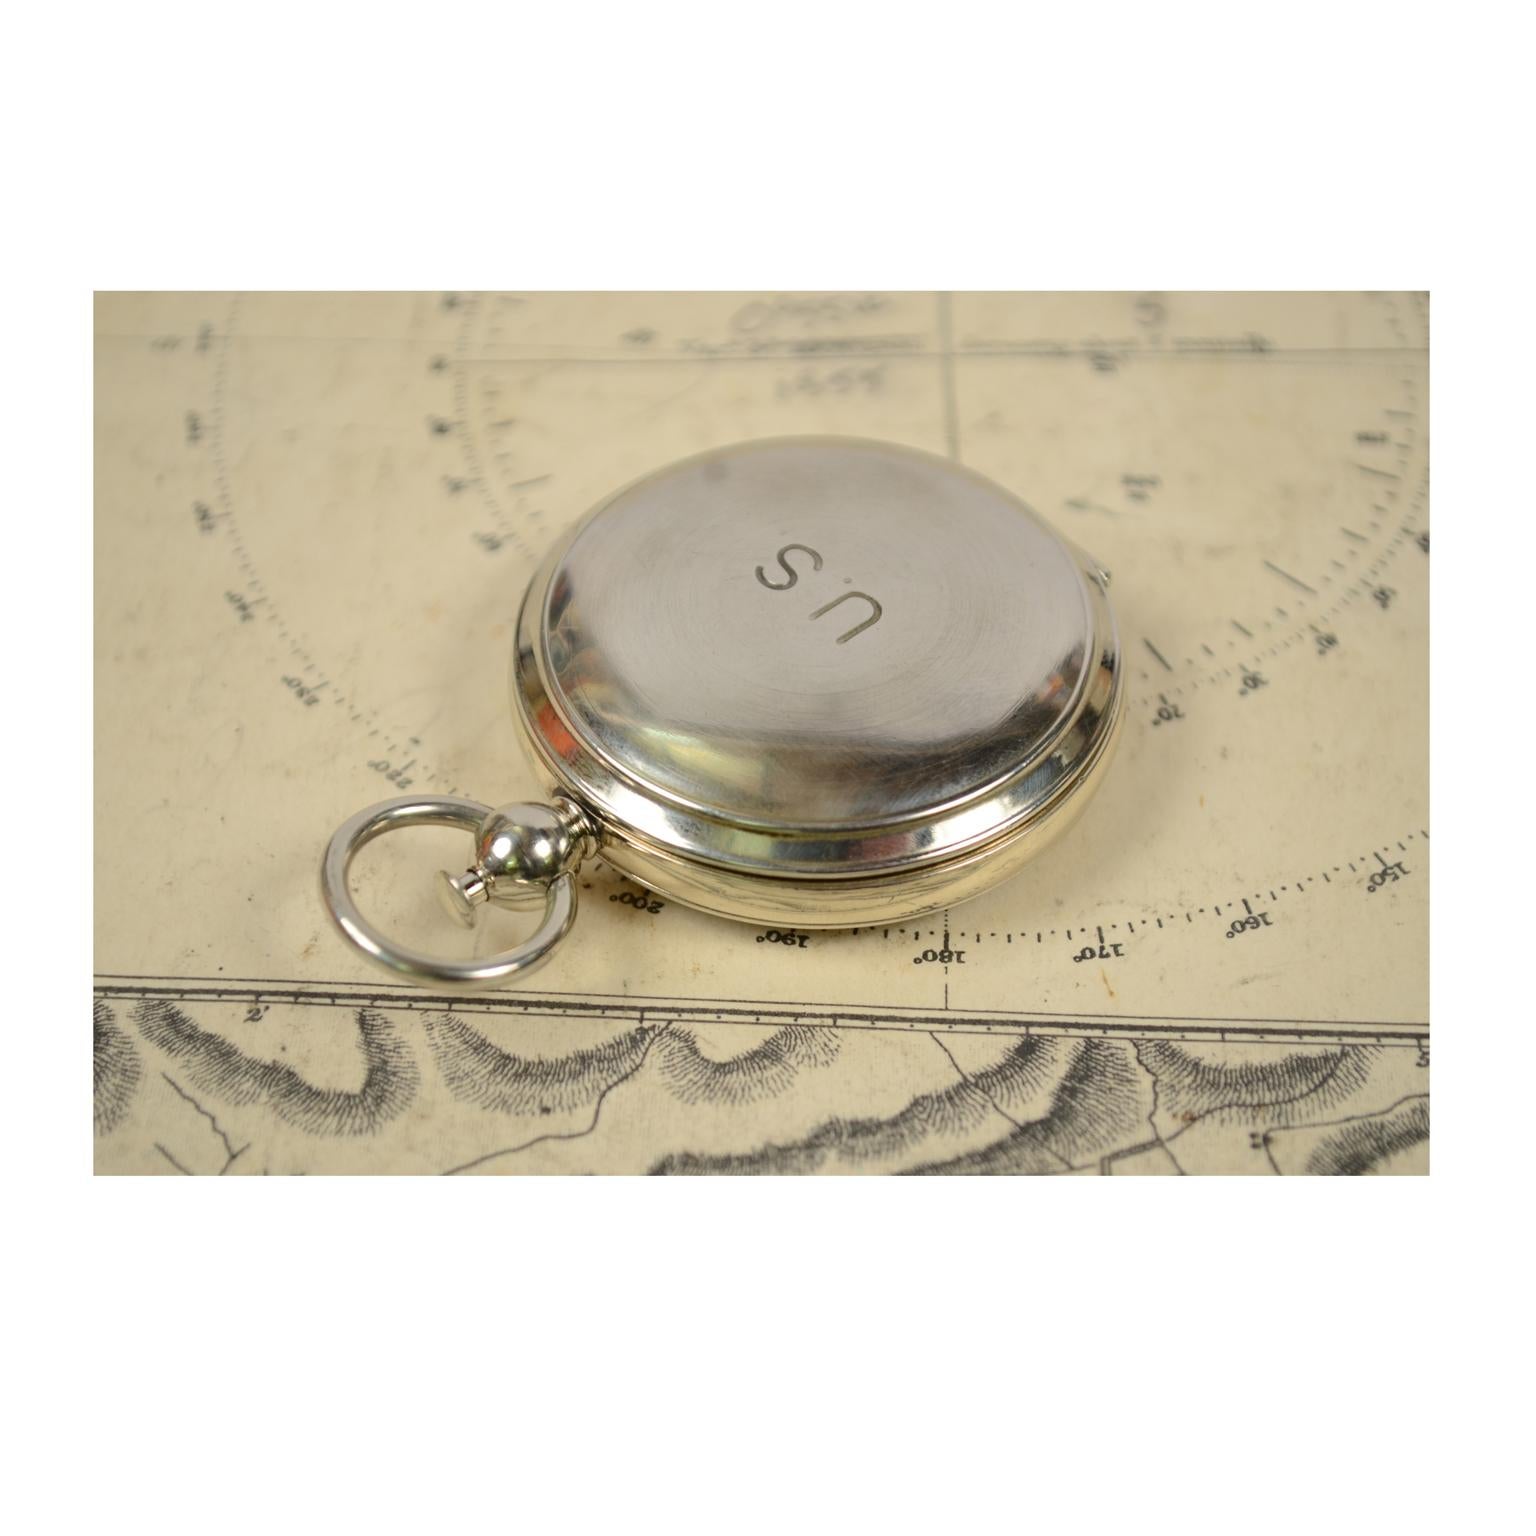 Compass Used by the American Aviation Officers in the 1920s Signed Wittnauer 6